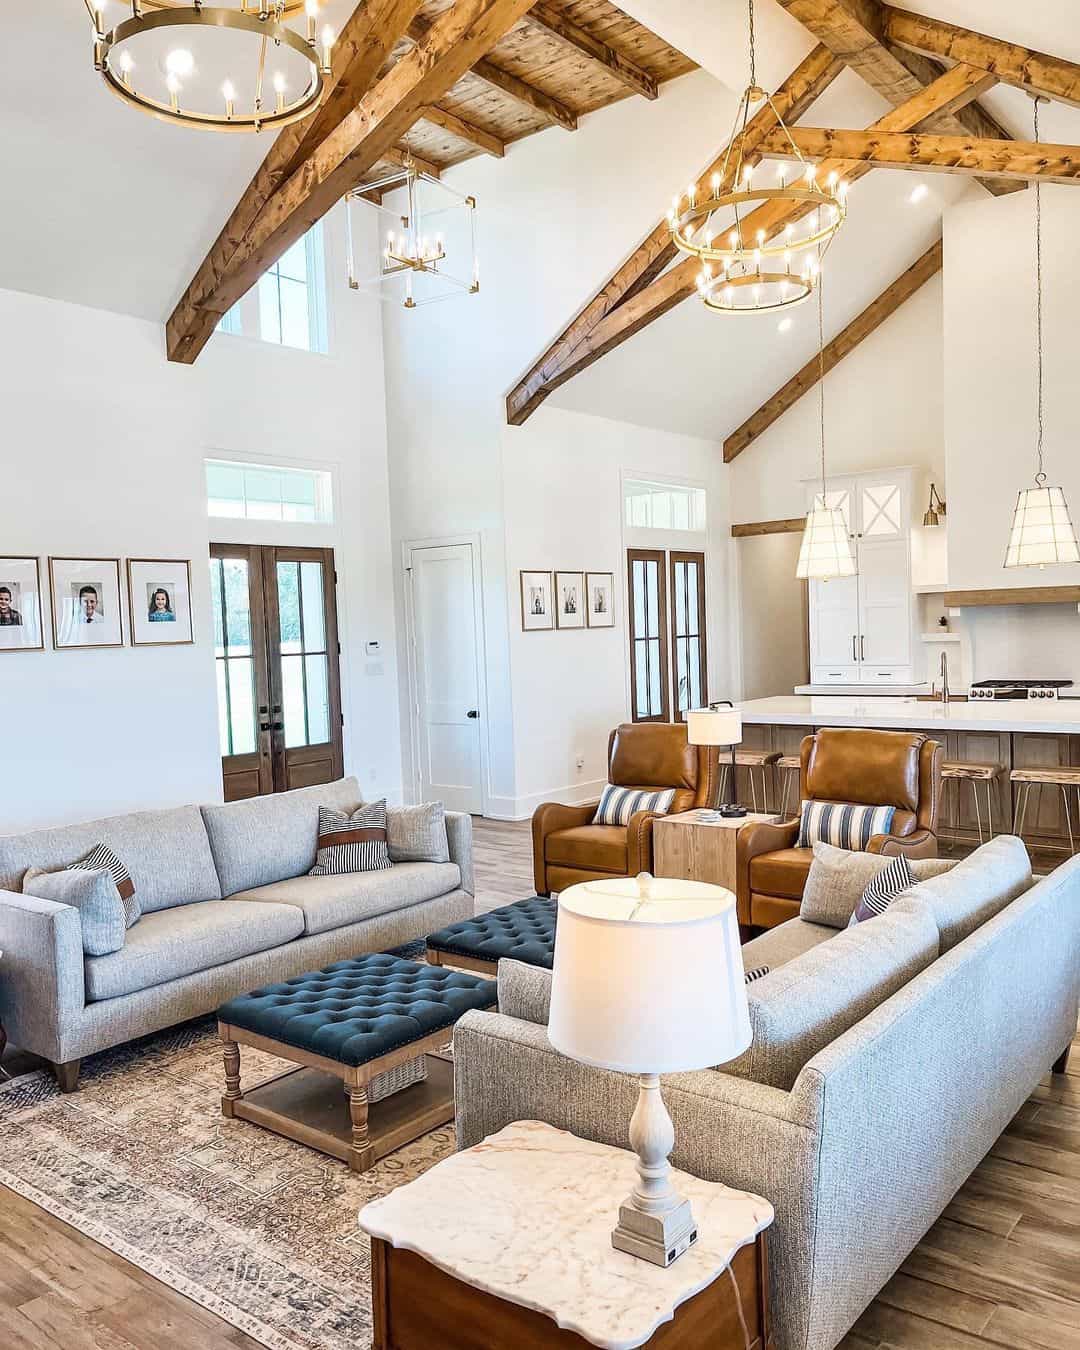 Farmhouse Elegance with Vaulted Ceilings and Exposed Wood Beams